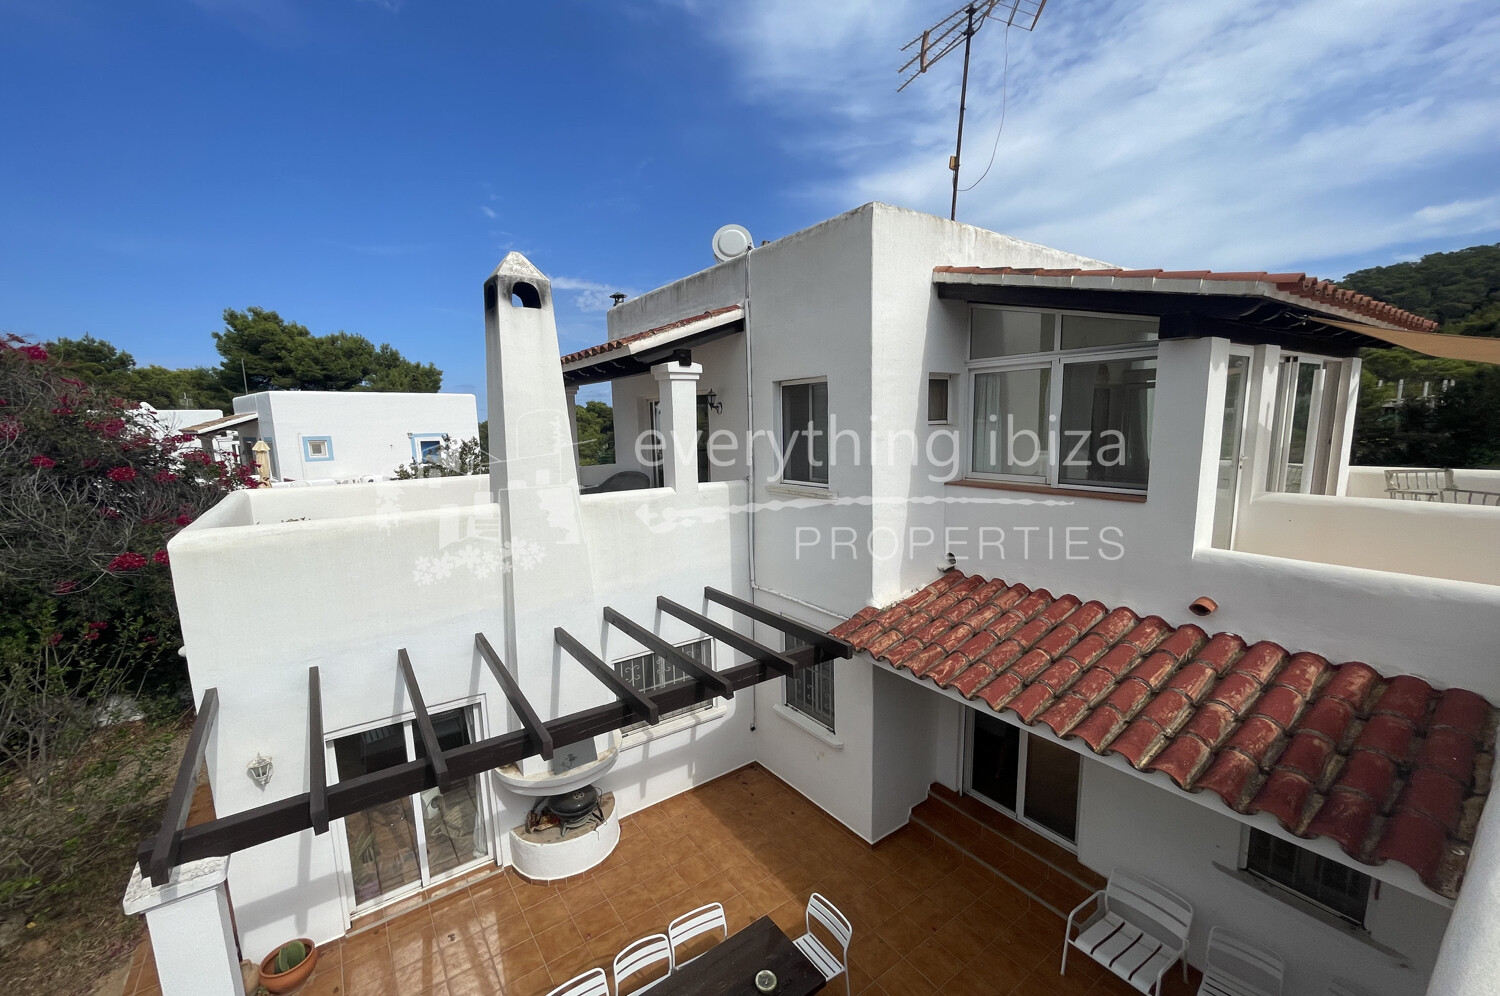 Charming Detached House Close to Popular San Carlos, ref. 1526, for sale in Ibiza by everything ibiza Properties